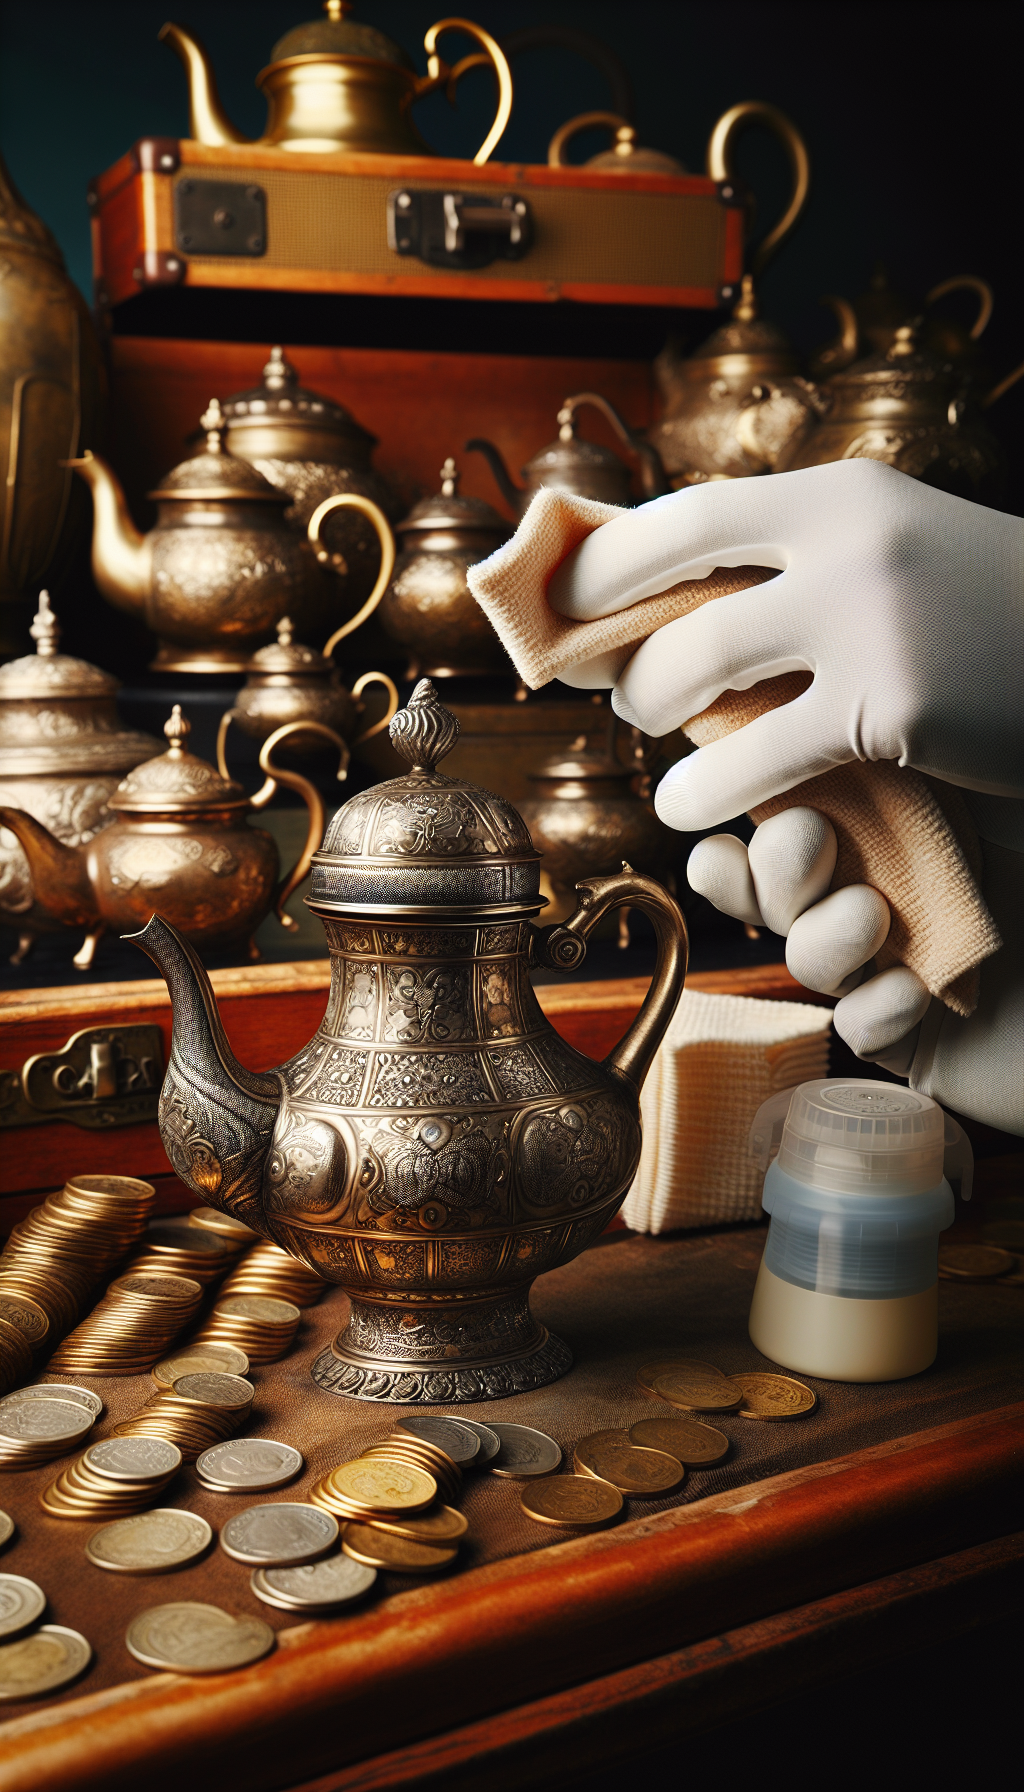 An intricate illustration depicting a vintage, ornate teapot being carefully polished by delicate, gloved hands against a backdrop of shimmering gold coins and gleaming teapots on antique shelving. The contrast of a modern maintenance kit (soft cloth, gentle cleanser) with the historical pieces emphasizes the value preservation of the timeless collection.